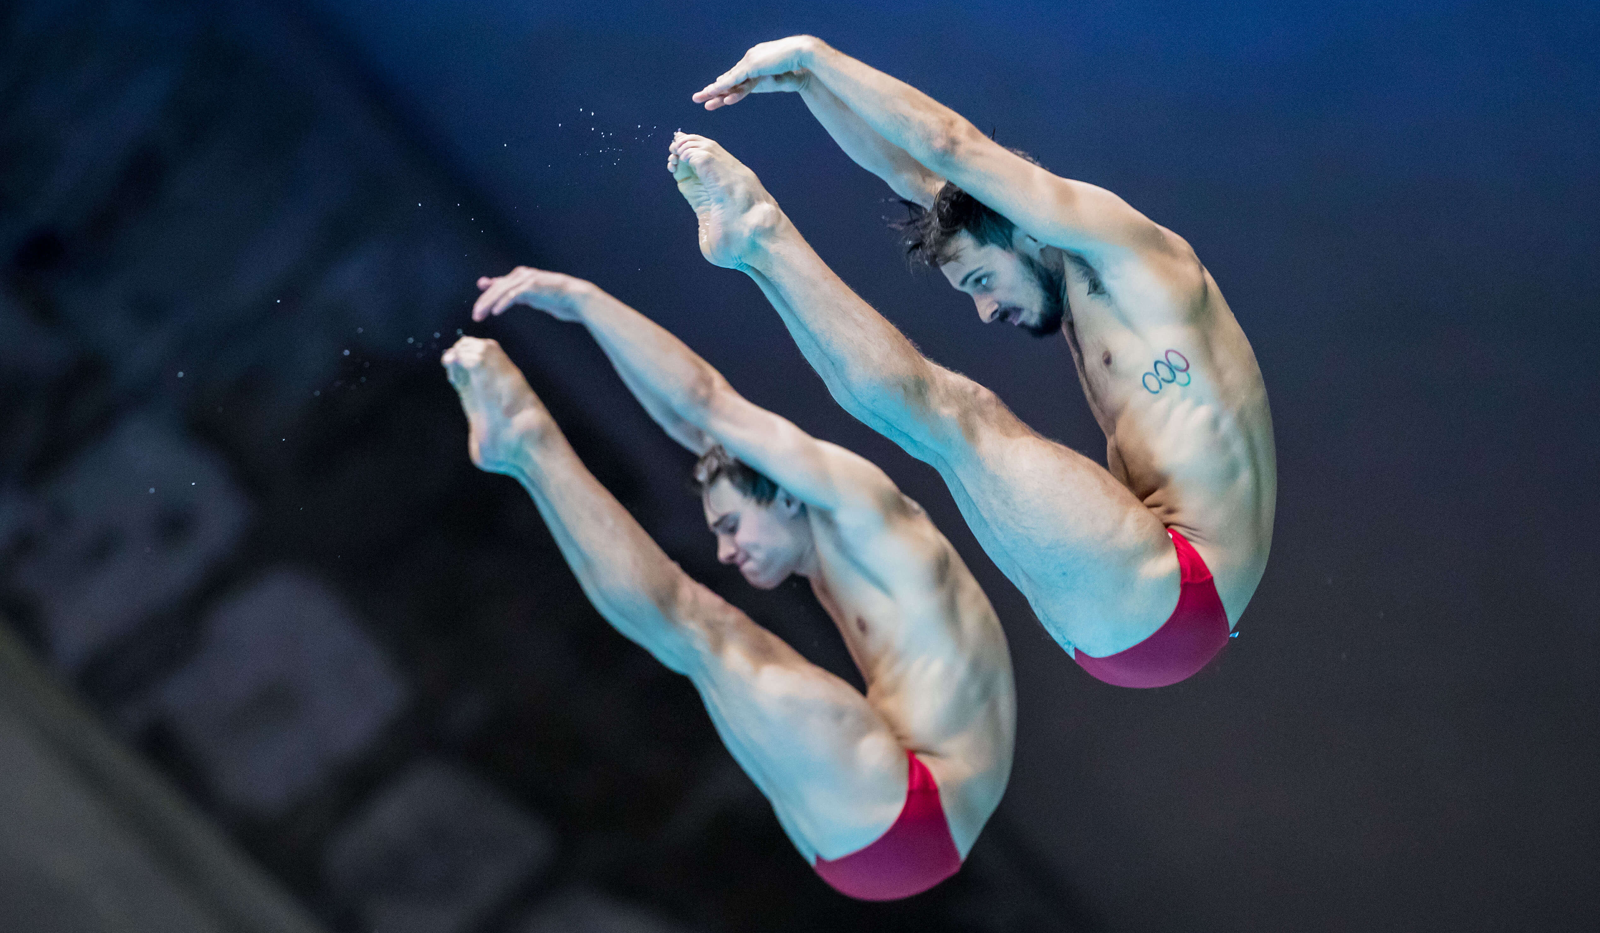 Beijing: Canada’s divers take home two bronze medals